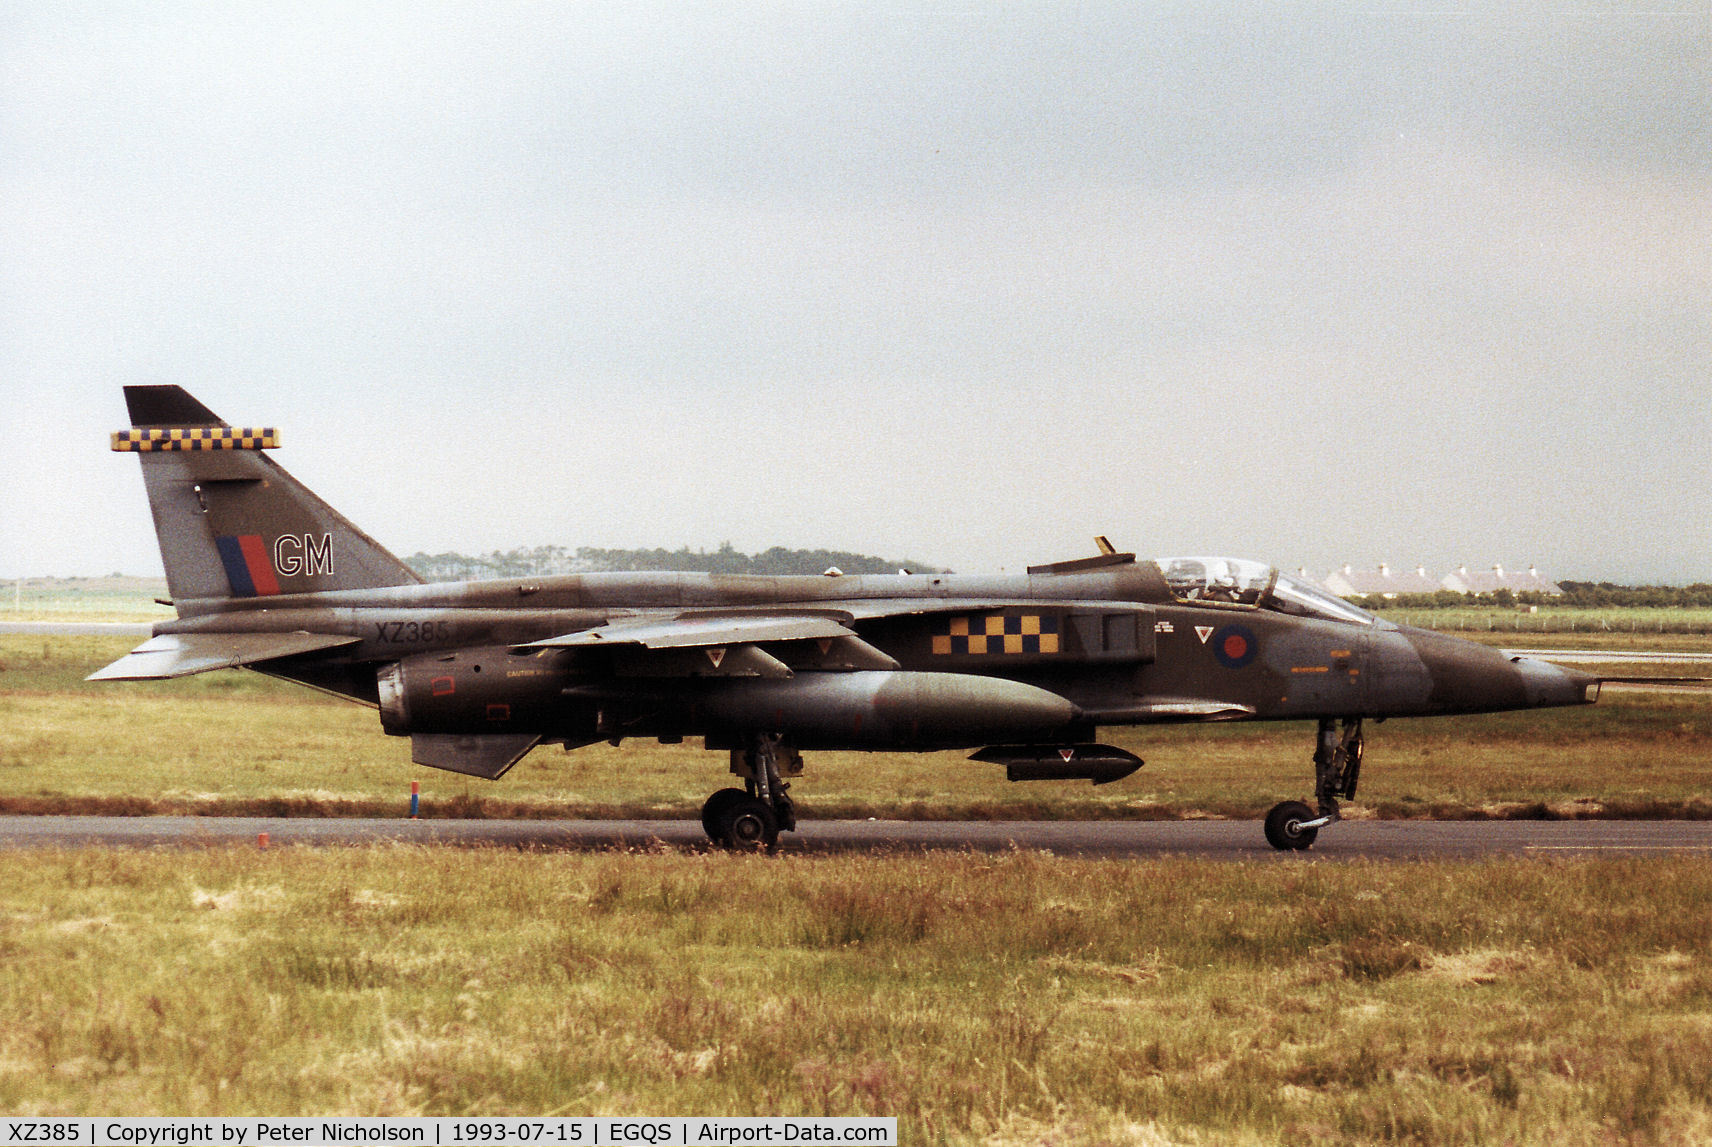 XZ385, 1977 Sepecat Jaguar GR.1A C/N S.150, Jaguar GR.1A of 54 Squadron at RAF Coltishall taxying to the active runway at RAF Lossiemouth in the Summer of 1993.